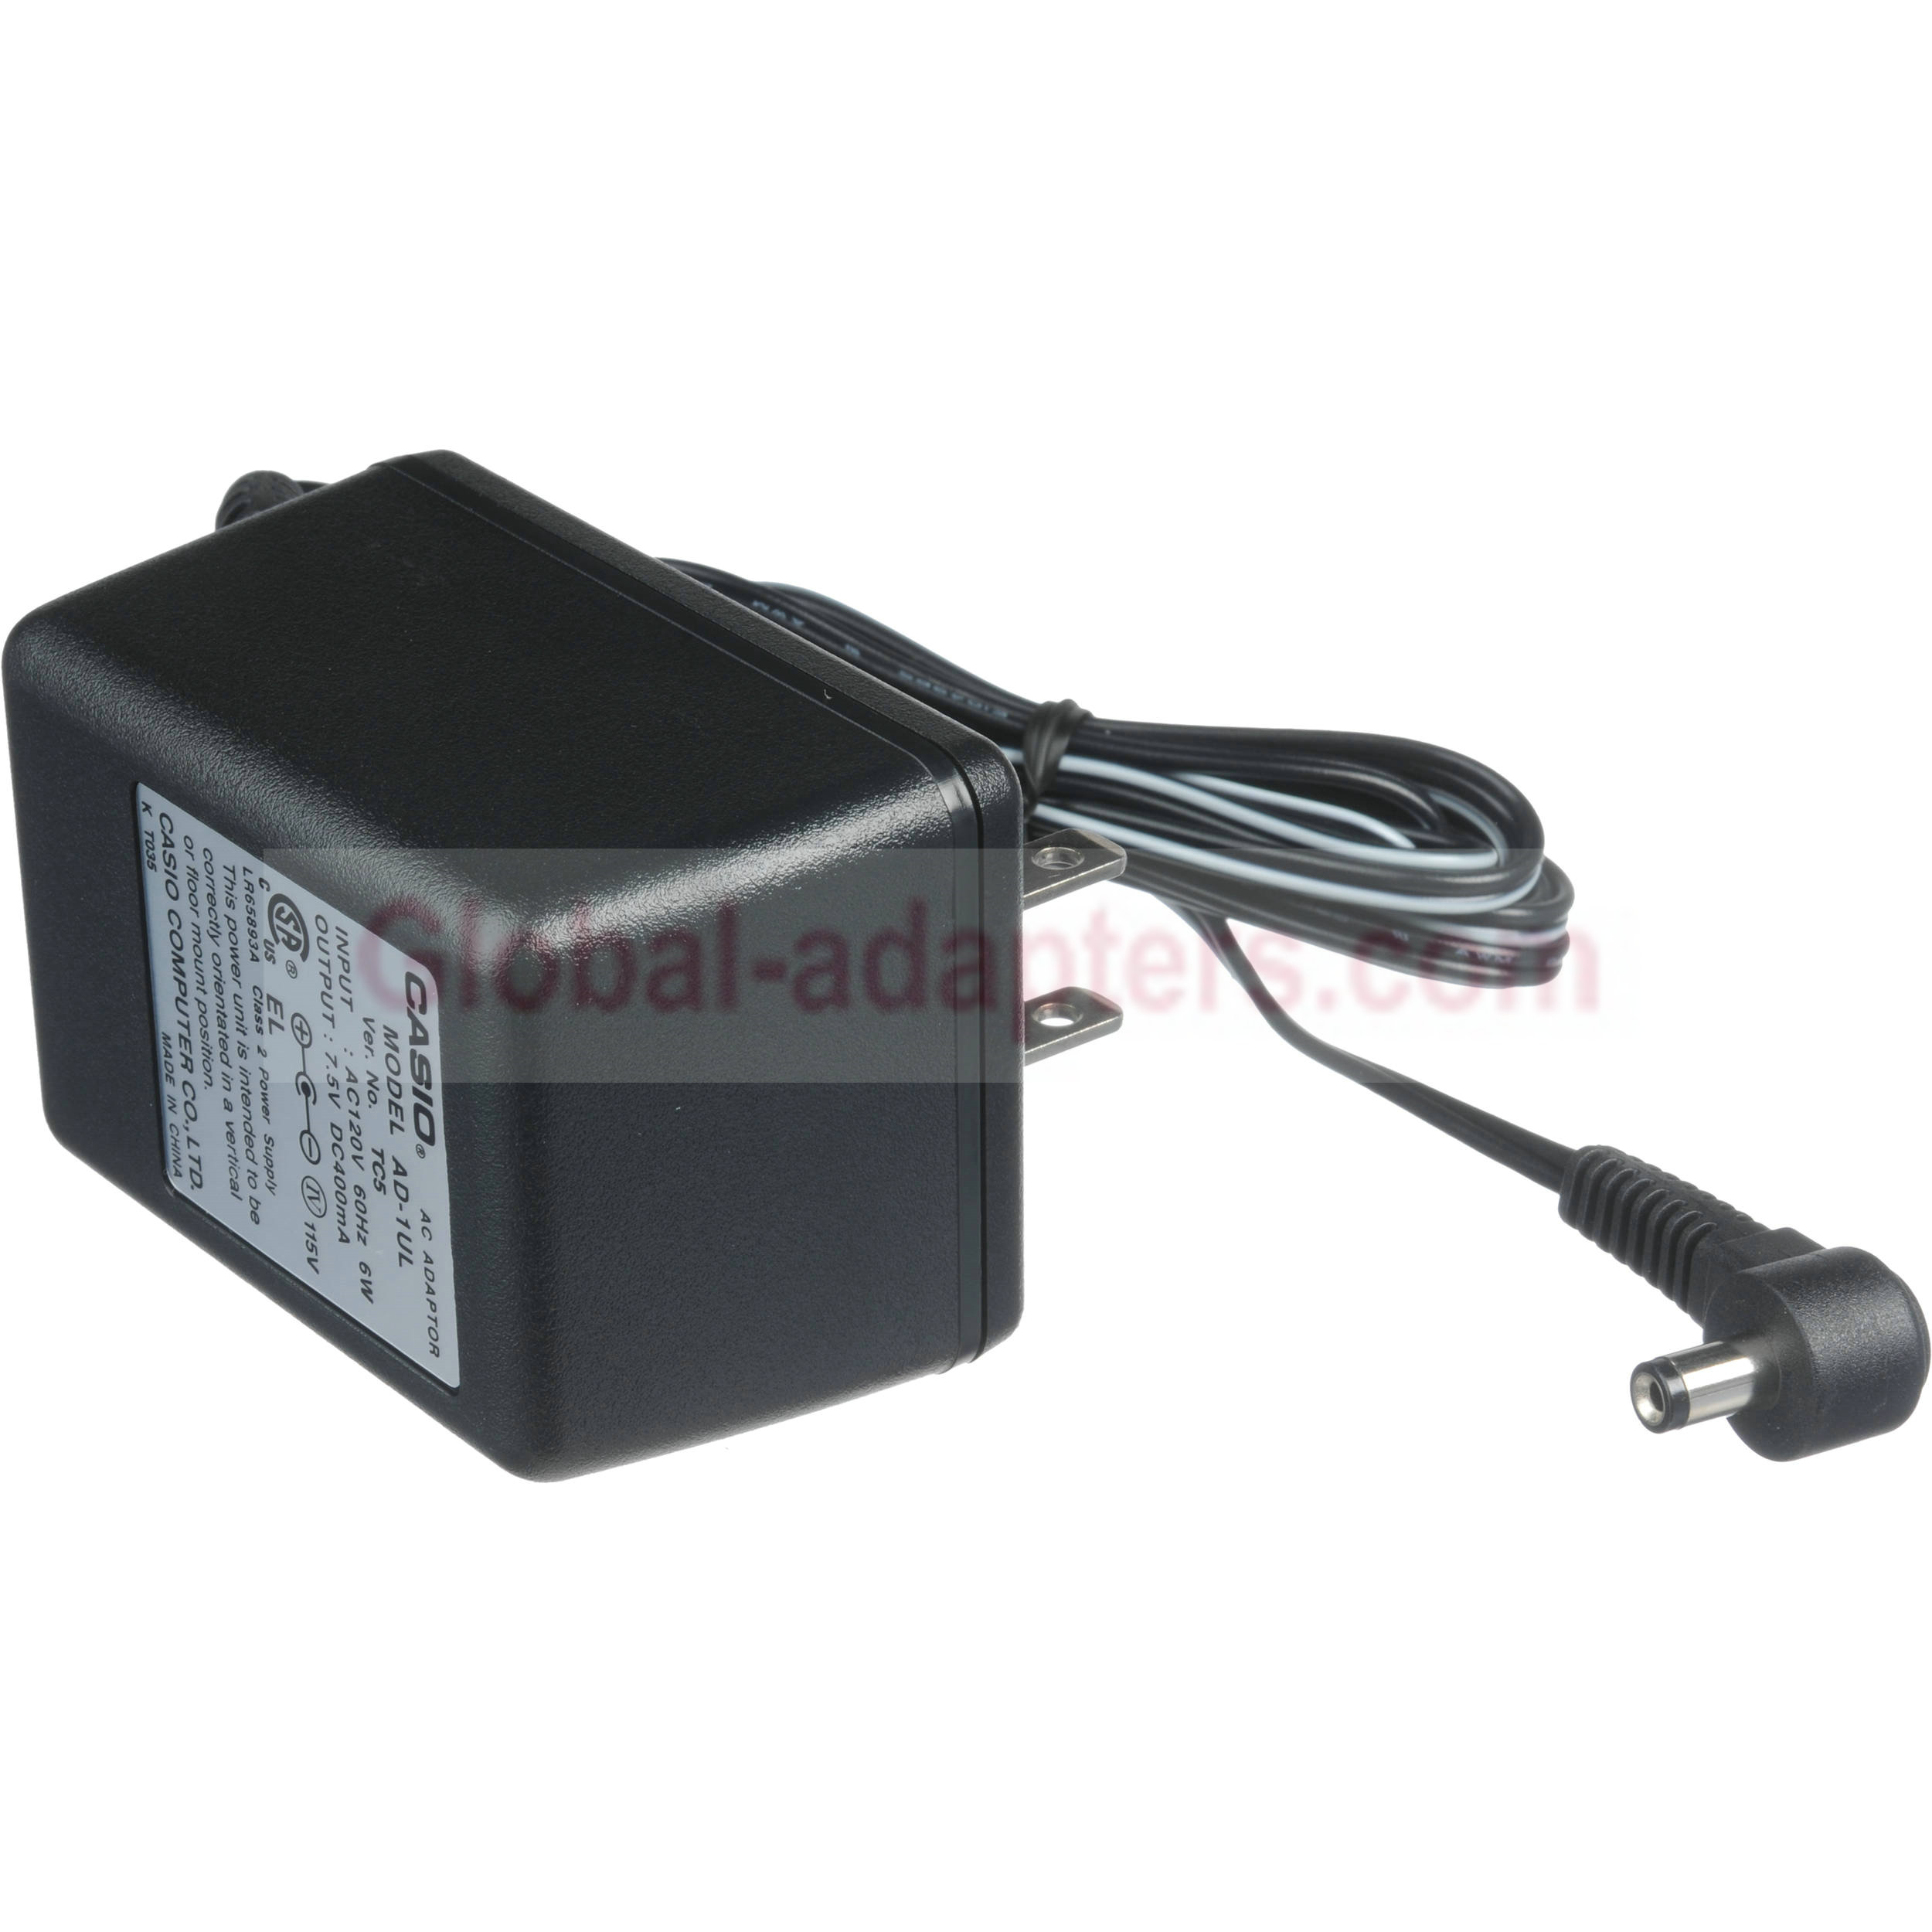 New 7.5V CASIO AD-1A 240V 2.1mm POWER SUPPLY AC ADAPTER